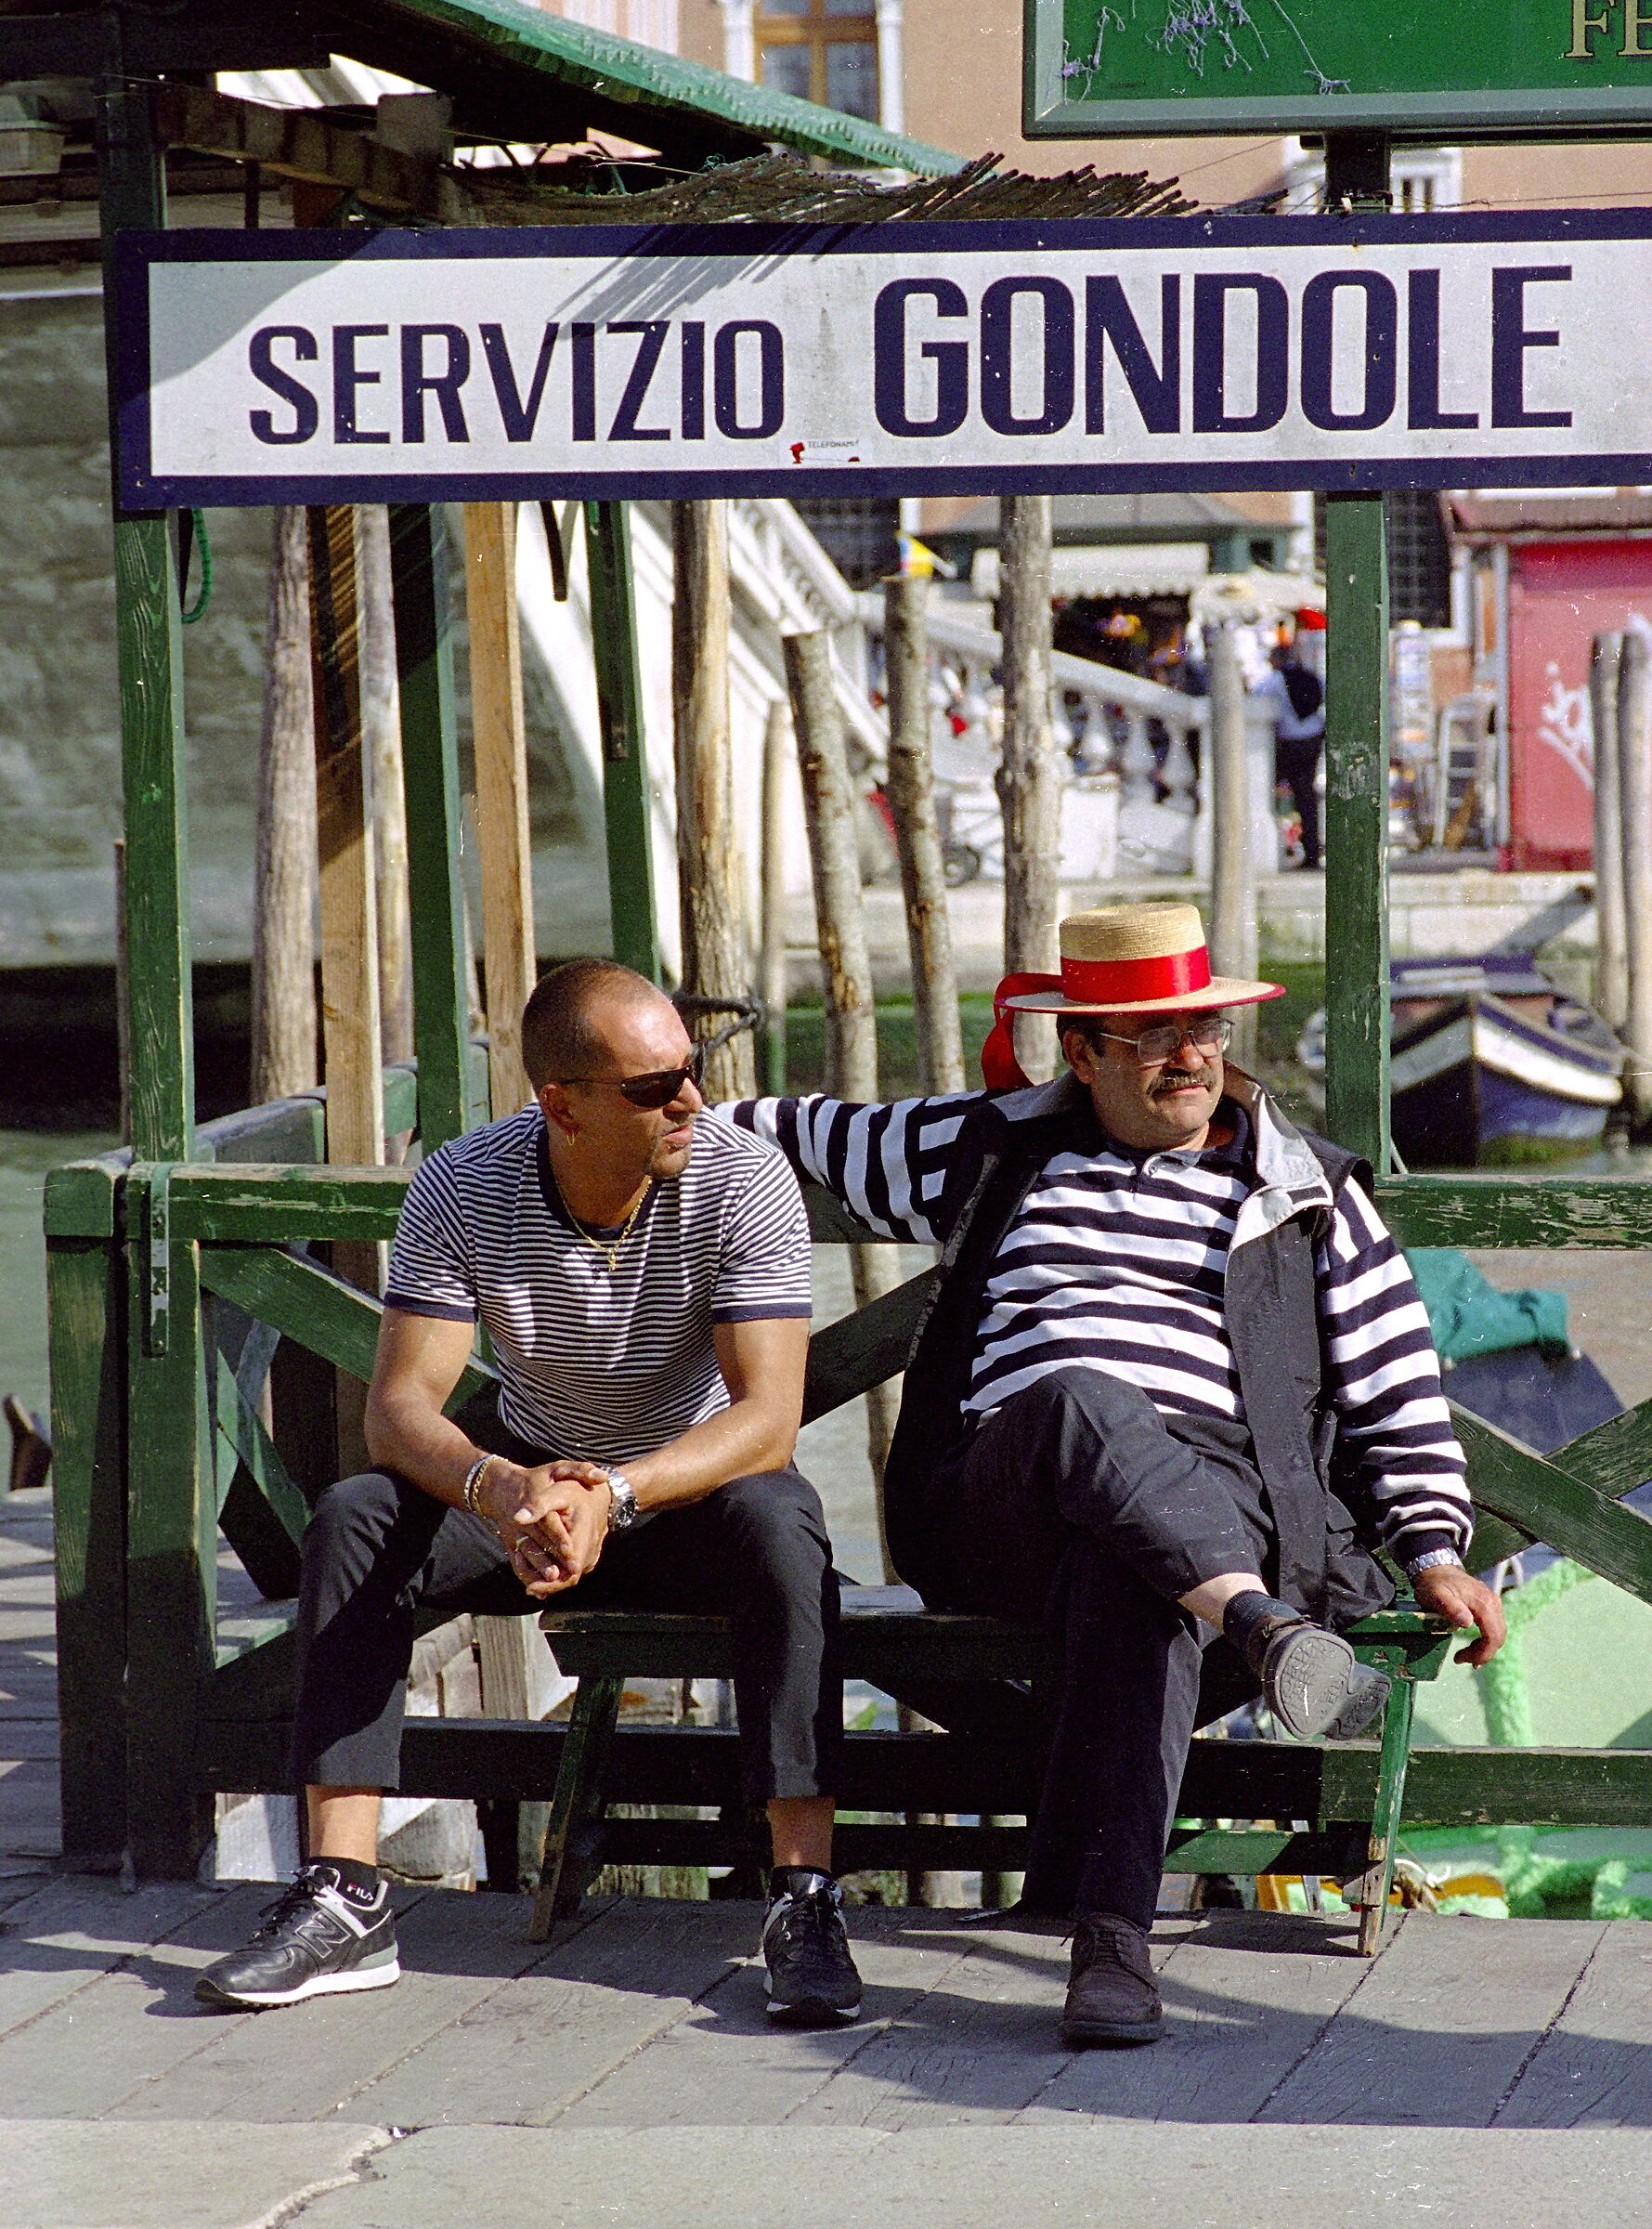 Just a few years ago in Venice...